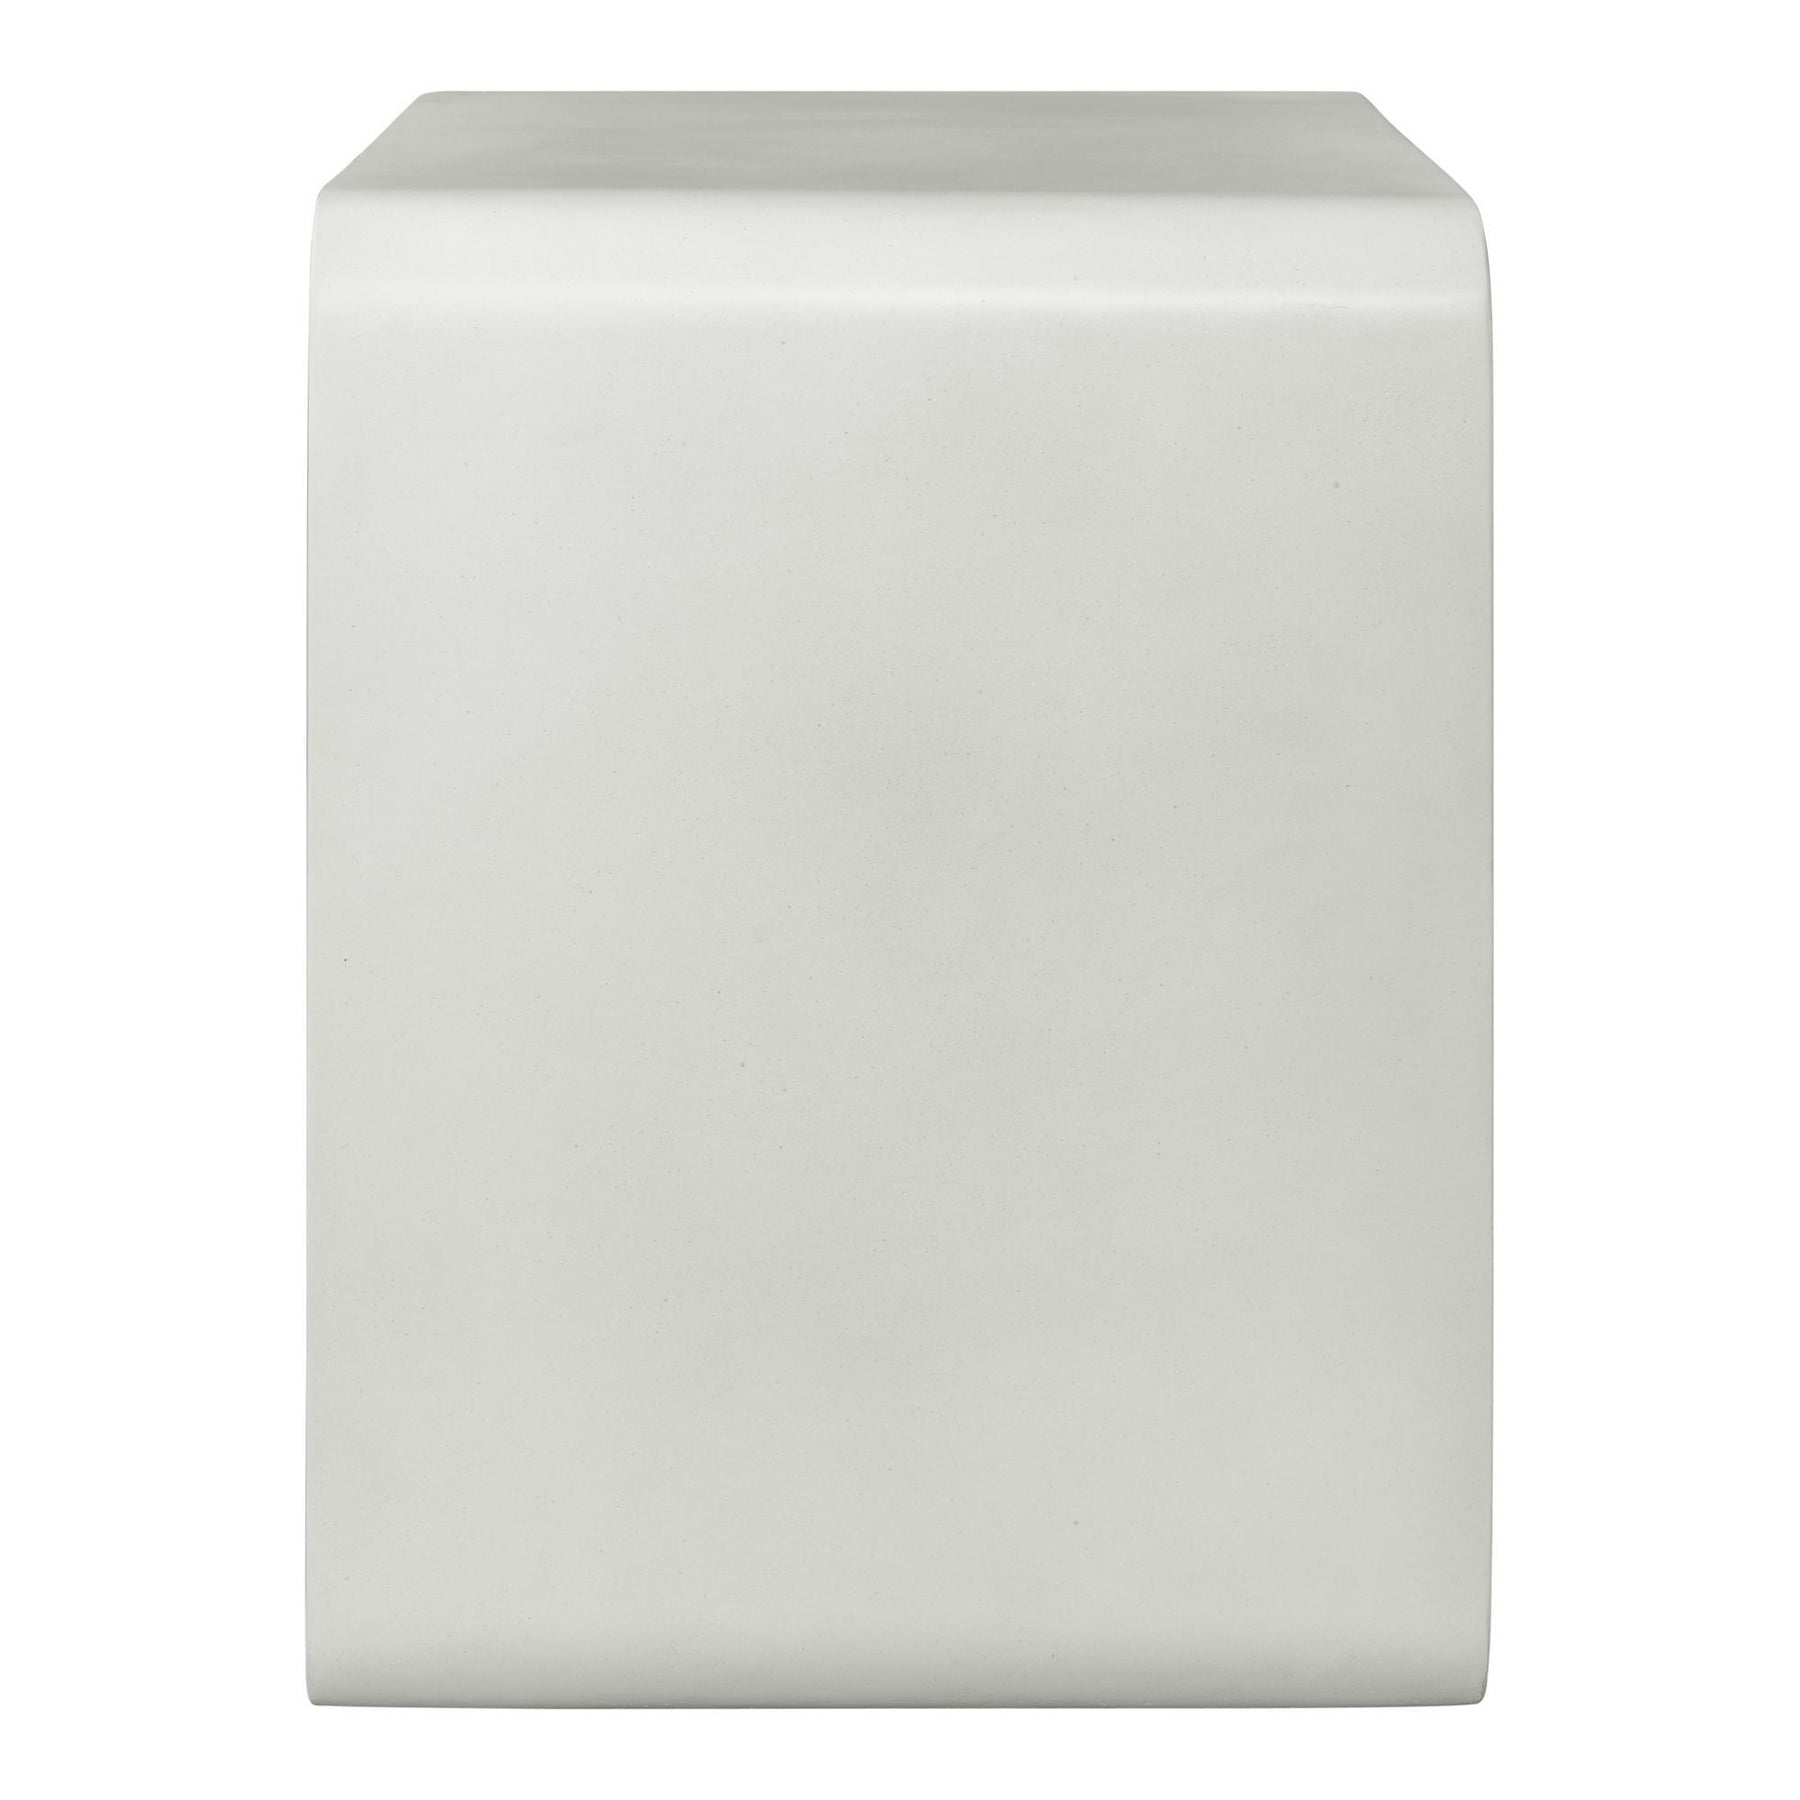 Moe's Home Collection Cali Accent Cube White - JK-1009-18